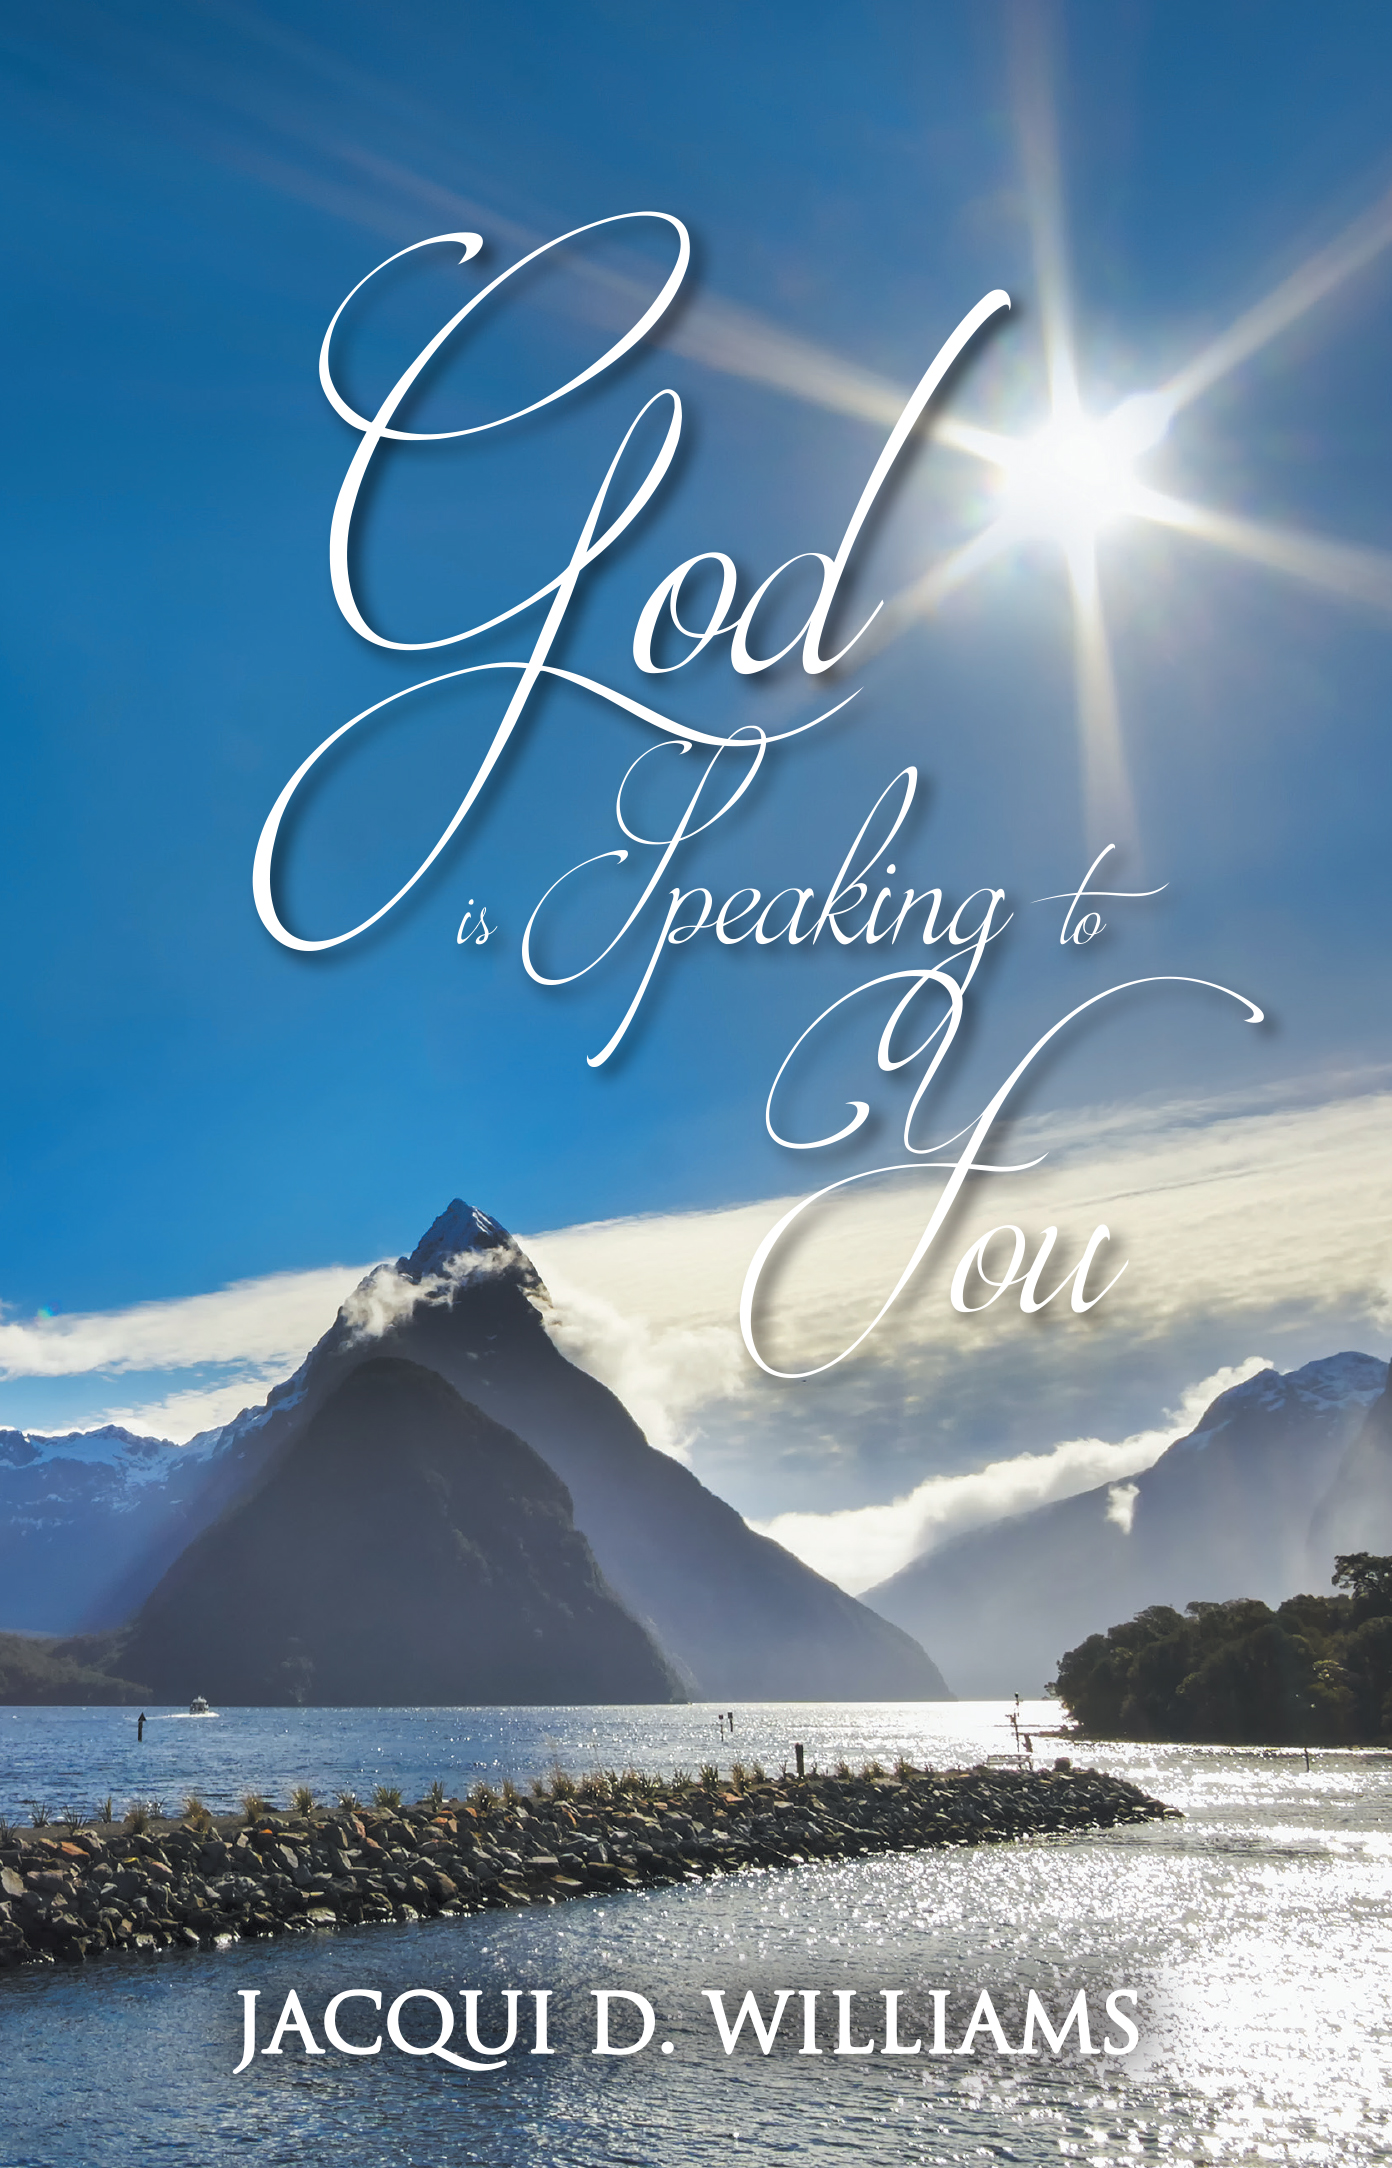 Jacqui D. Williams’s Newly Released "God Is Speaking to You" is an Empowering Exploration of Divine Communication